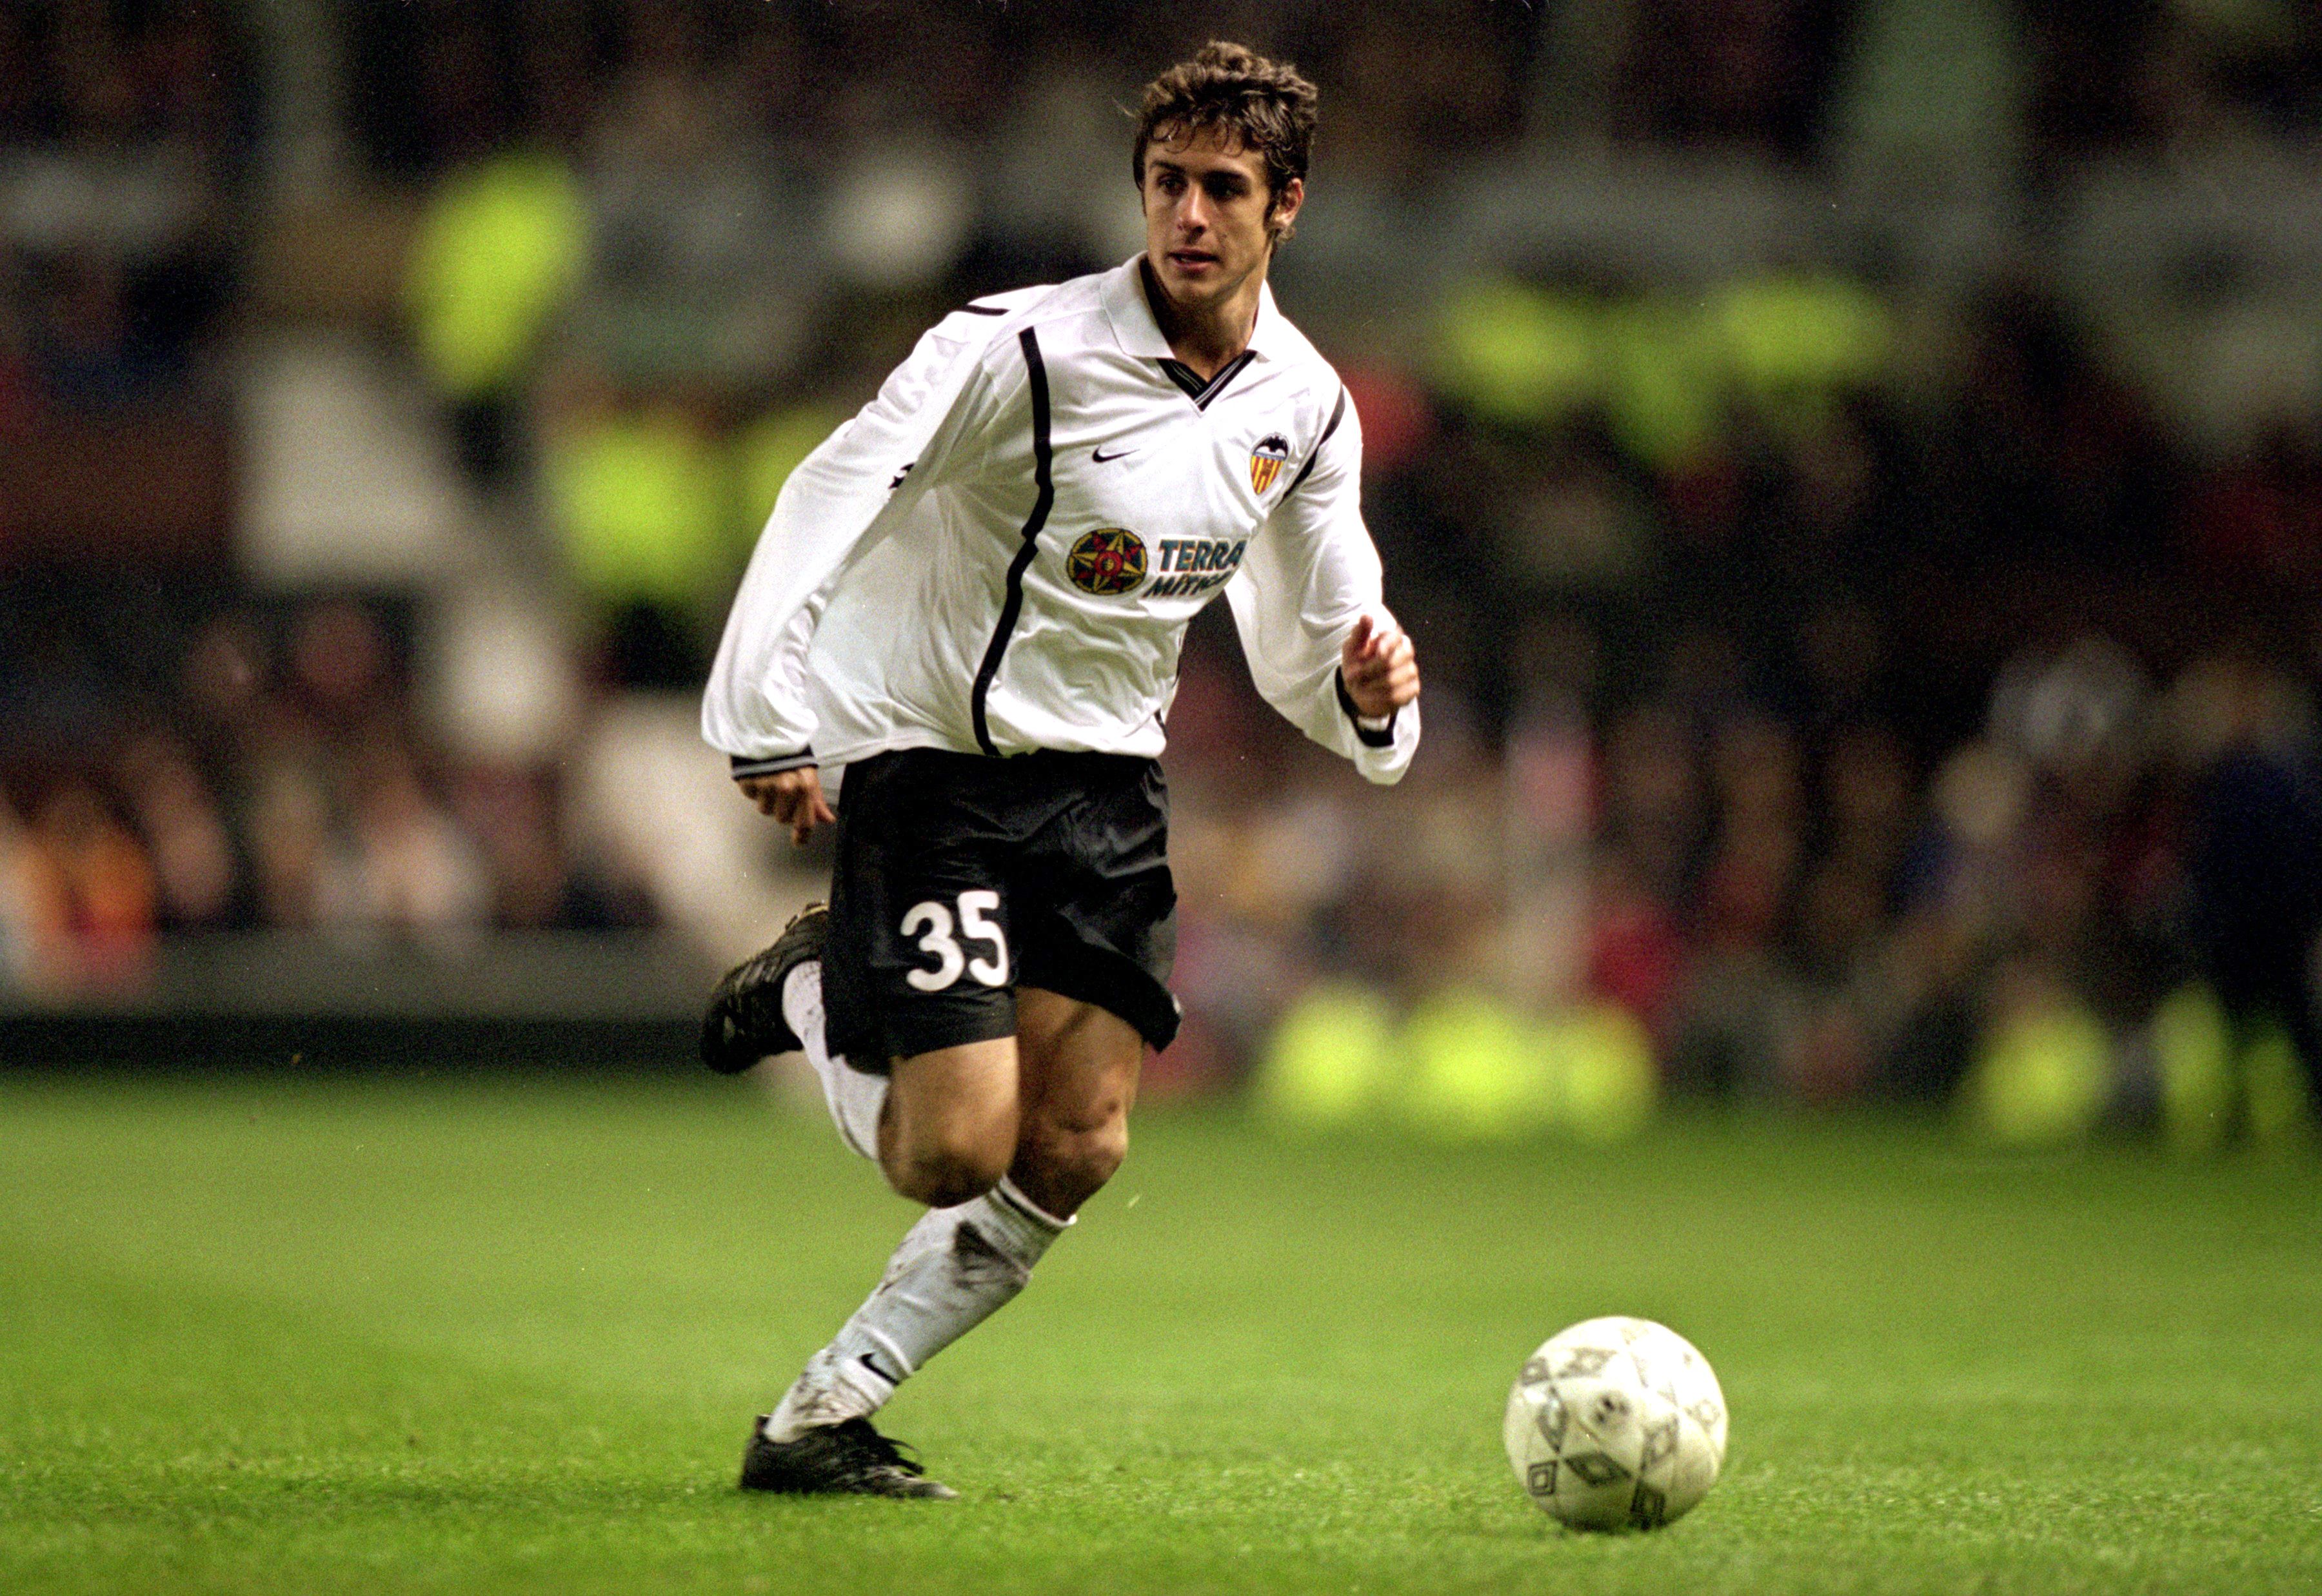 20 Feb 2001:  Pablo Cesar Aimar of Valencia runs with the ball during the UEFA Champions League Group A match against Manchester United played at Old Trafford, in Manchester, England. The match ended in a 1-1 draw.  Mandatory Credit: Laurence Griffiths /Allsport